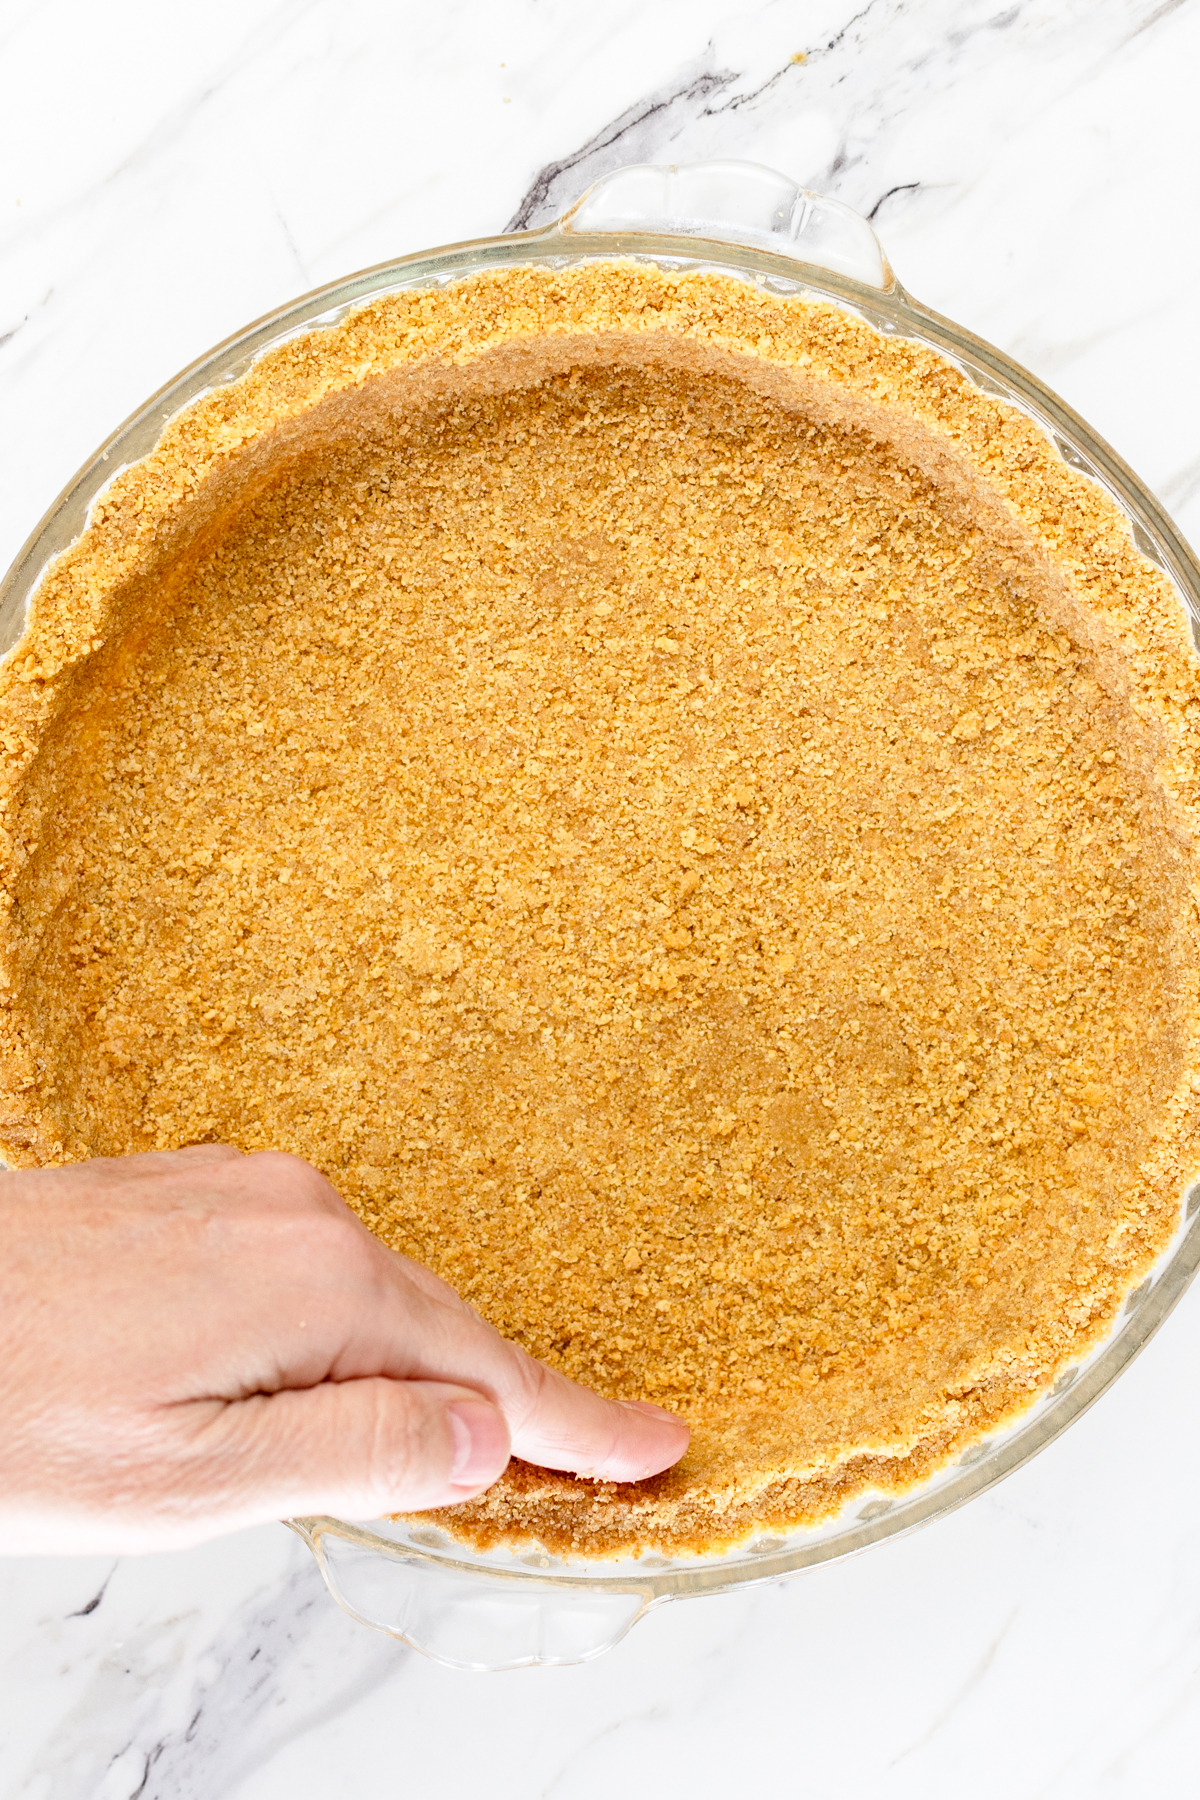 Top view of a glass pie dish with crumbled graham crackers miced with butter and sugar being pressed into the bottom and sides to form a pie crust. 